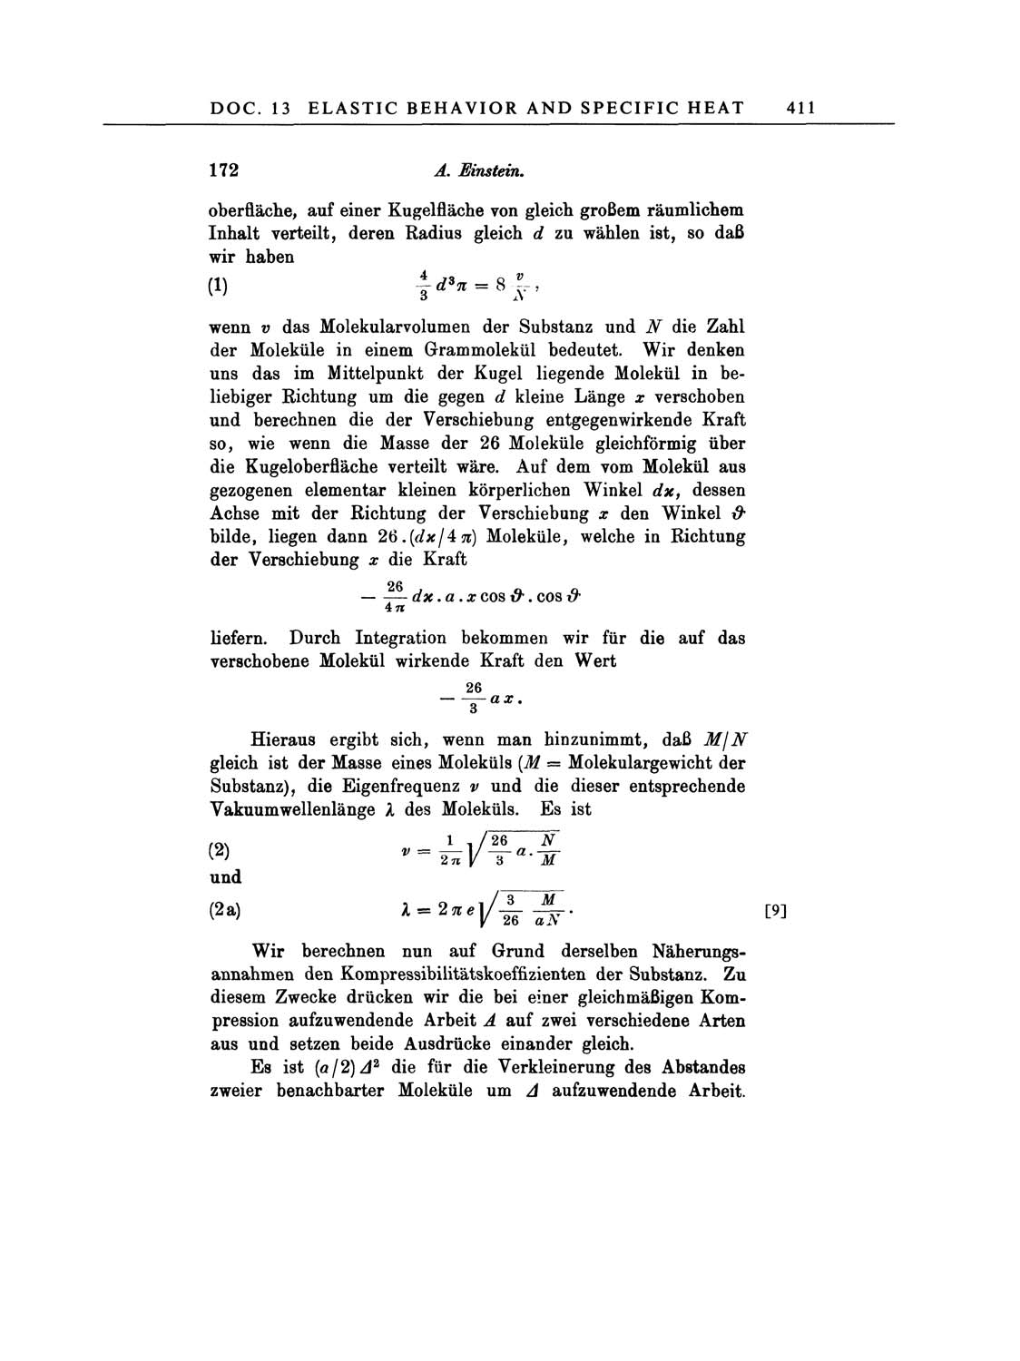 Volume 3: The Swiss Years: Writings 1909-1911 page 411